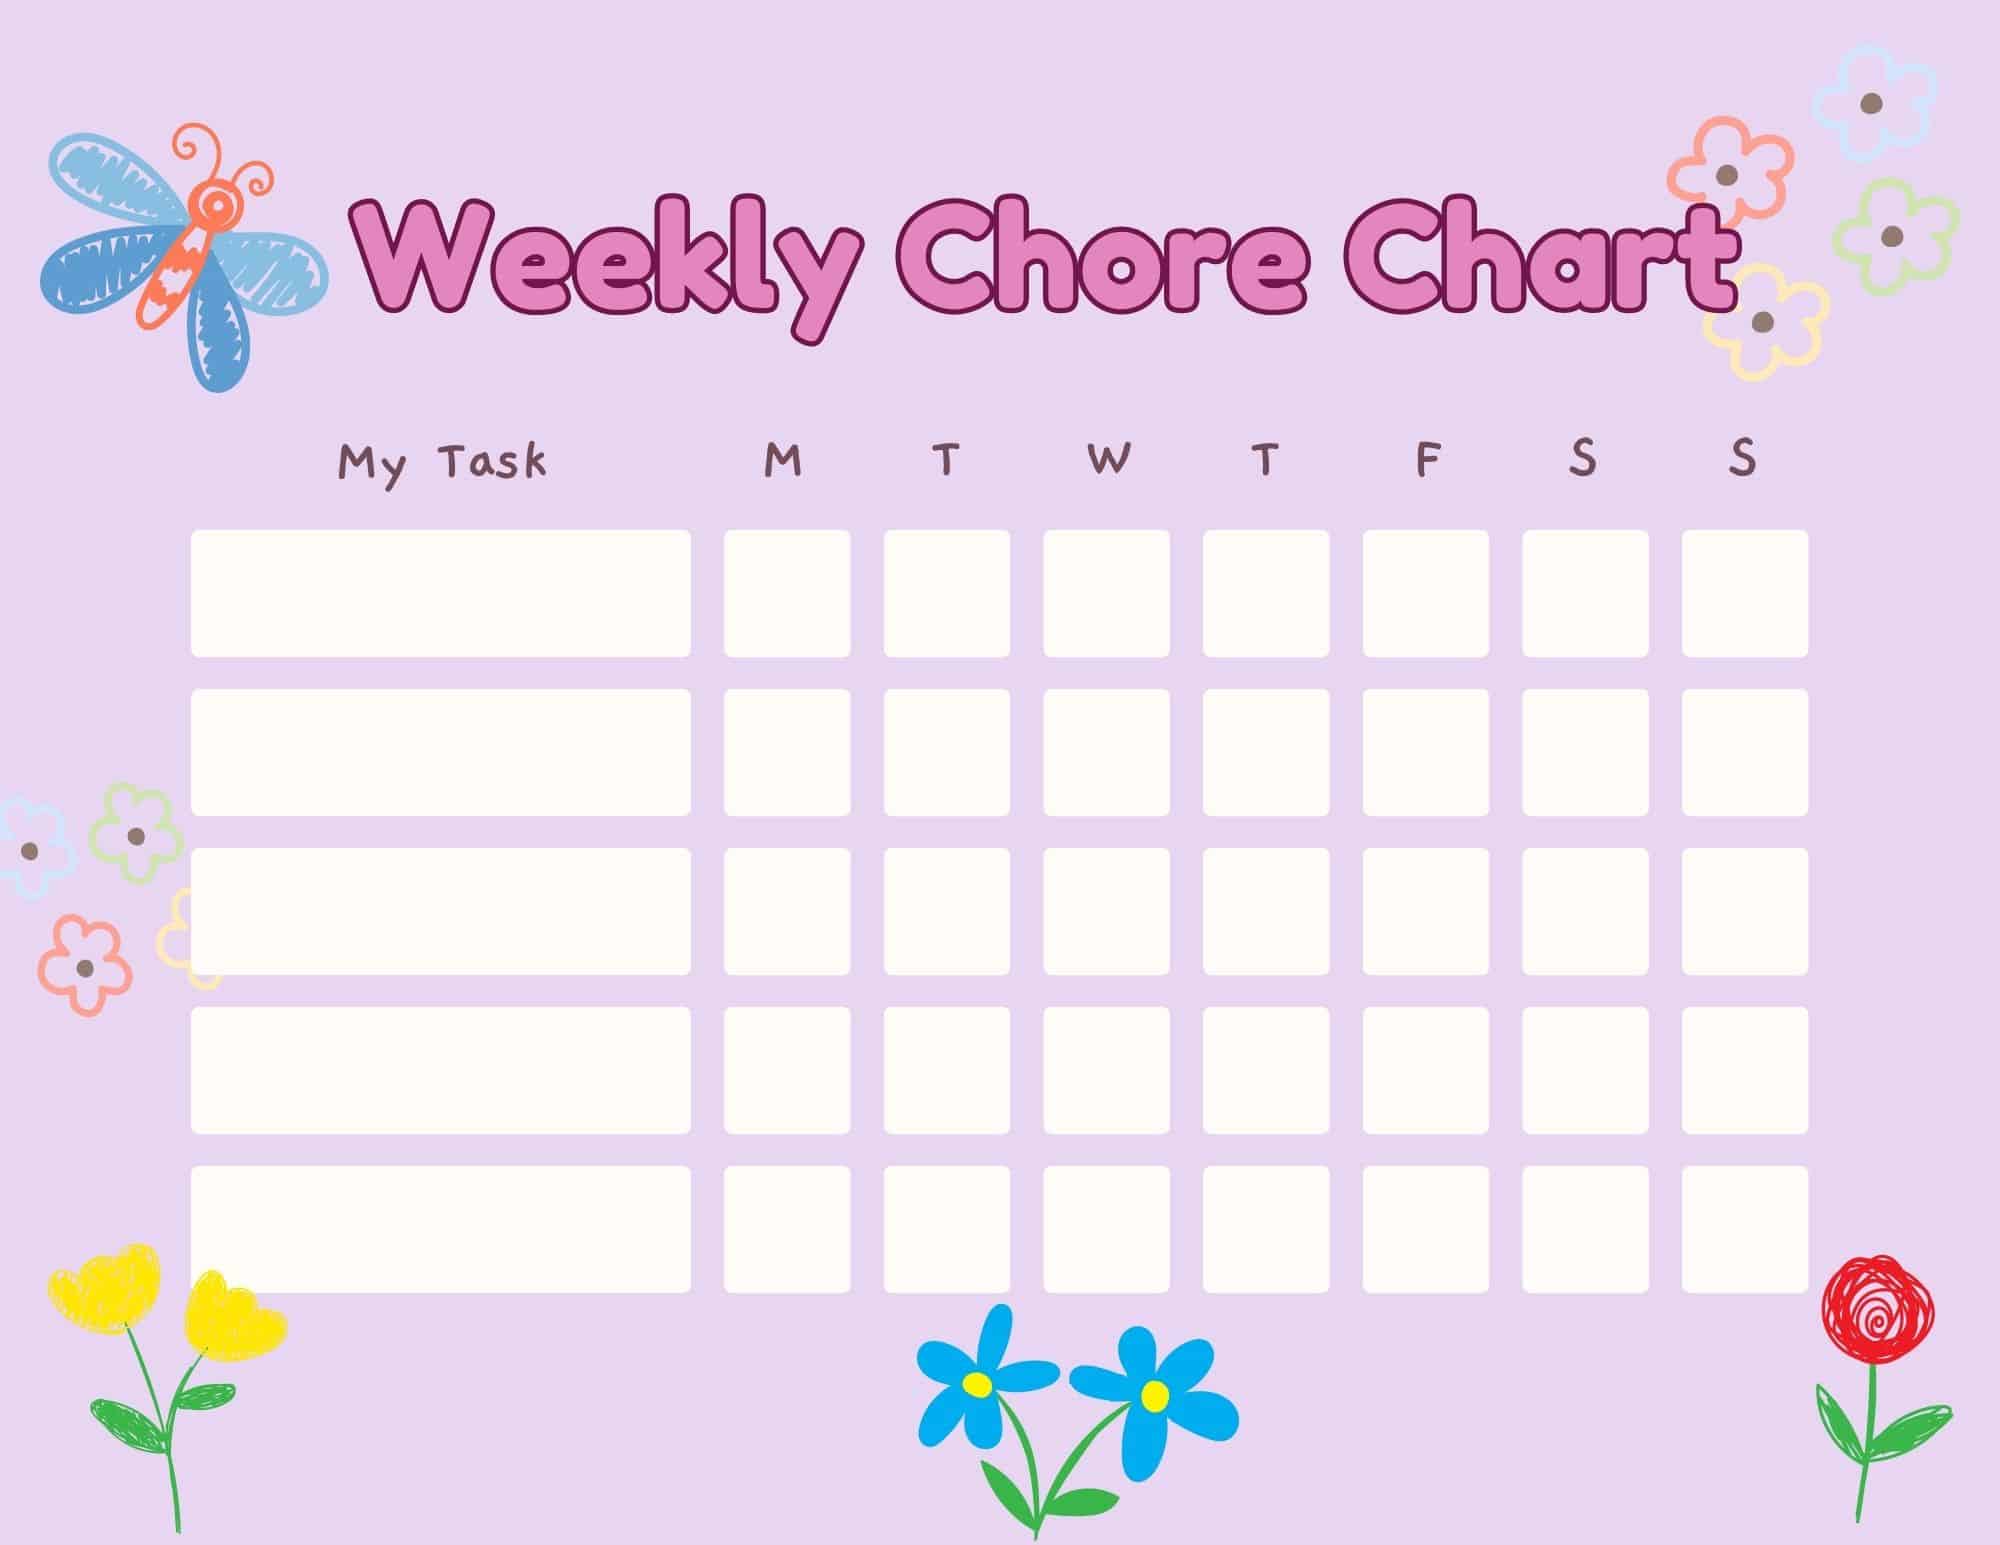 Weekly Chore Chart for 8-Year-Old Girl